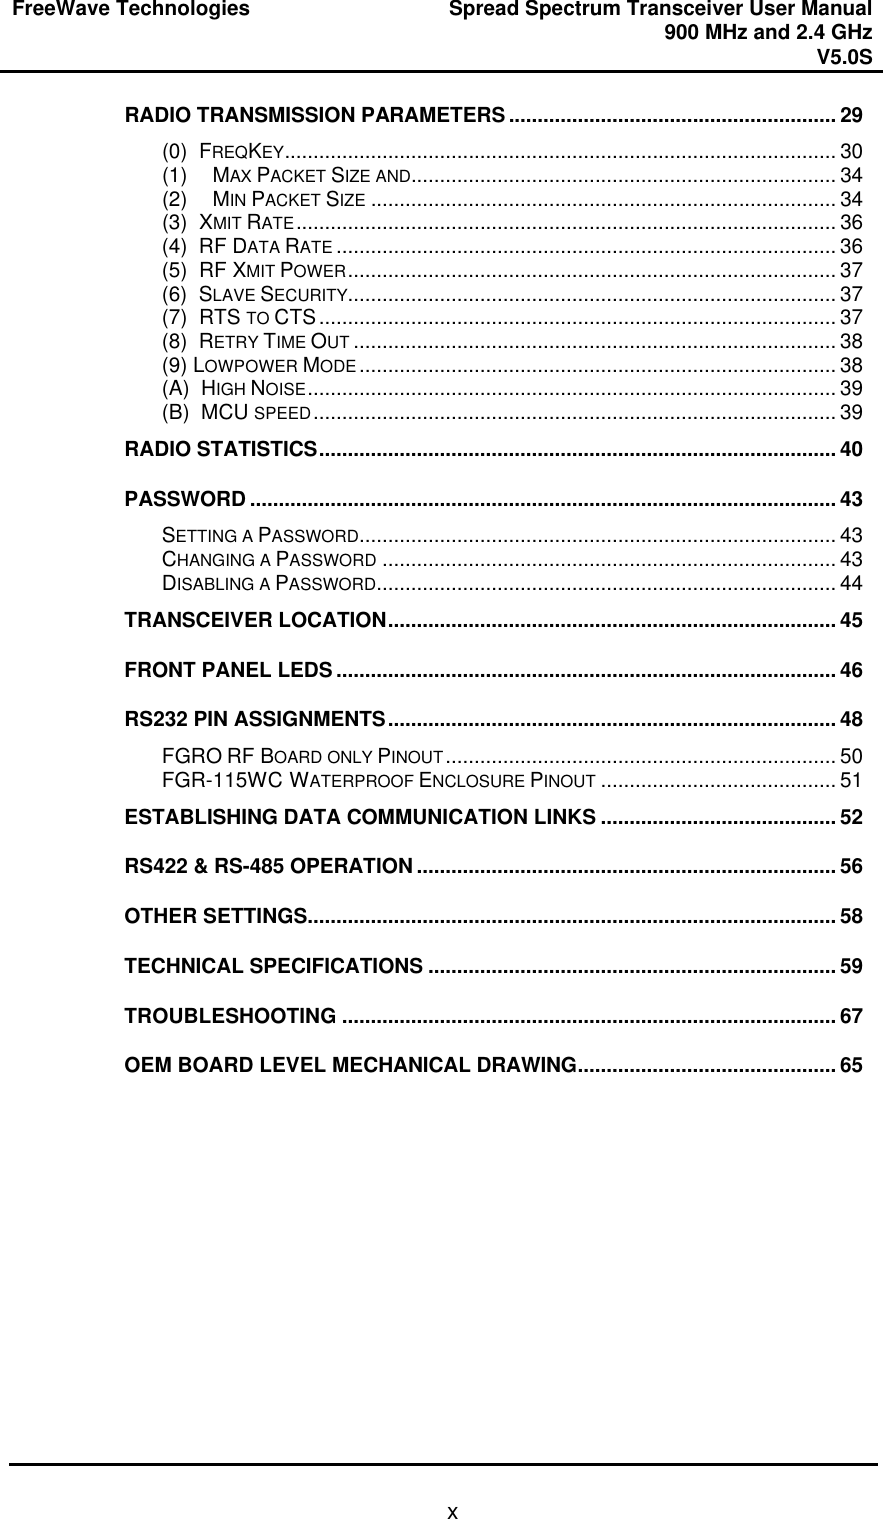 FreeWave Technologies Spread Spectrum Transceiver User Manual 900 MHz and 2.4 GHz V5.0S   xRADIO TRANSMISSION PARAMETERS......................................................... 29 (0)  FREQKEY................................................................................................ 30 (1) MAX PACKET SIZE AND.......................................................................... 34 (2) MIN PACKET SIZE ................................................................................. 34 (3)  XMIT RATE.............................................................................................. 36 (4)  RF DATA RATE ....................................................................................... 36 (5)  RF XMIT POWER..................................................................................... 37 (6)  SLAVE SECURITY..................................................................................... 37 (7)  RTS TO CTS.......................................................................................... 37 (8)  RETRY TIME OUT .................................................................................... 38 (9) LOWPOWER MODE ................................................................................... 38 (A)  HIGH NOISE............................................................................................ 39 (B)  MCU SPEED........................................................................................... 39 RADIO STATISTICS.......................................................................................... 40 PASSWORD ...................................................................................................... 43 SETTING A PASSWORD................................................................................... 43 CHANGING A PASSWORD ............................................................................... 43 DISABLING A PASSWORD................................................................................ 44 TRANSCEIVER LOCATION.............................................................................. 45 FRONT PANEL LEDS ....................................................................................... 46 RS232 PIN ASSIGNMENTS.............................................................................. 48 FGRO RF BOARD ONLY PINOUT.................................................................... 50 FGR-115WC WATERPROOF ENCLOSURE PINOUT ......................................... 51 ESTABLISHING DATA COMMUNICATION LINKS ......................................... 52 RS422 &amp; RS-485 OPERATION ......................................................................... 56 OTHER SETTINGS............................................................................................ 58 TECHNICAL SPECIFICATIONS ....................................................................... 59 TROUBLESHOOTING ...................................................................................... 67 OEM BOARD LEVEL MECHANICAL DRAWING............................................. 65  